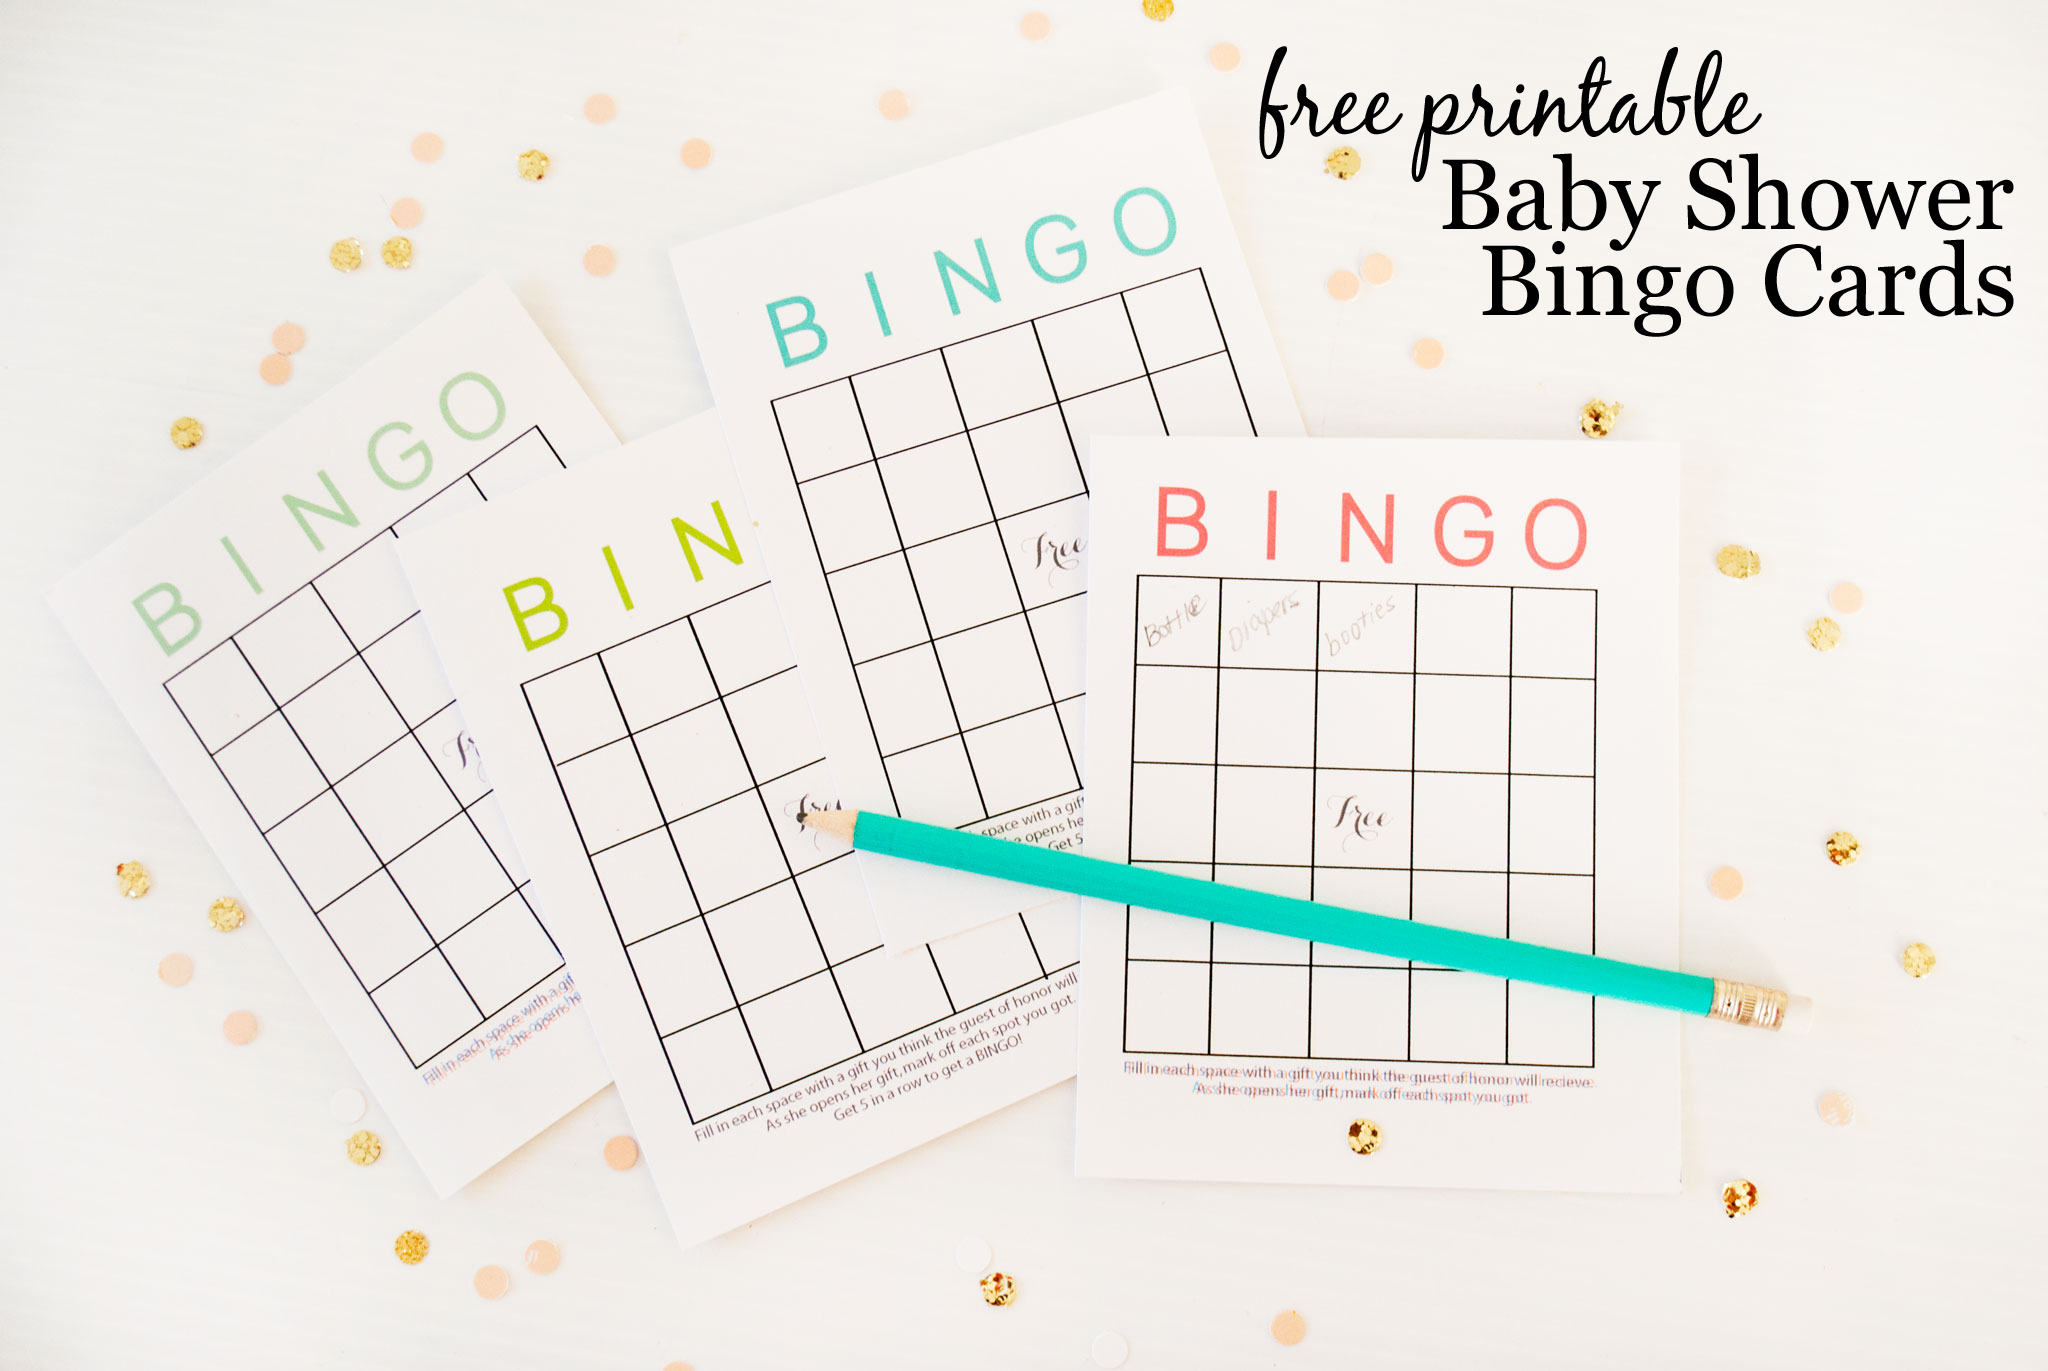 Free Printable Baby Shower Bingo Cards - Project Nursery for Free Printable Baby Shower Bingo Cards